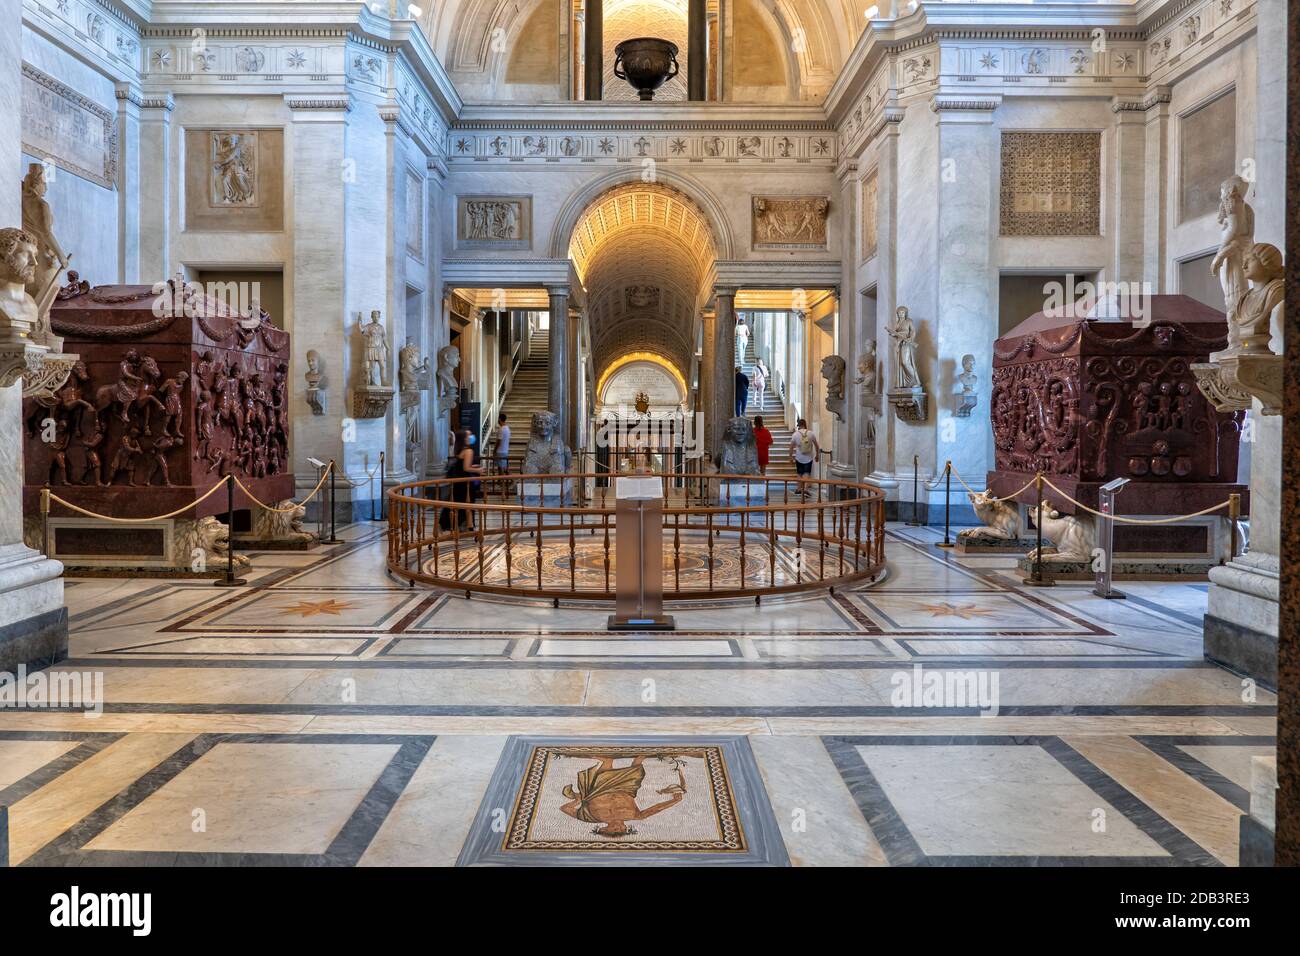 Greek Cross Hall (Sala a Croce Greca), Museo Clementino interior, Vatican Museums, Rome, Italy Stock Photo - Alamy